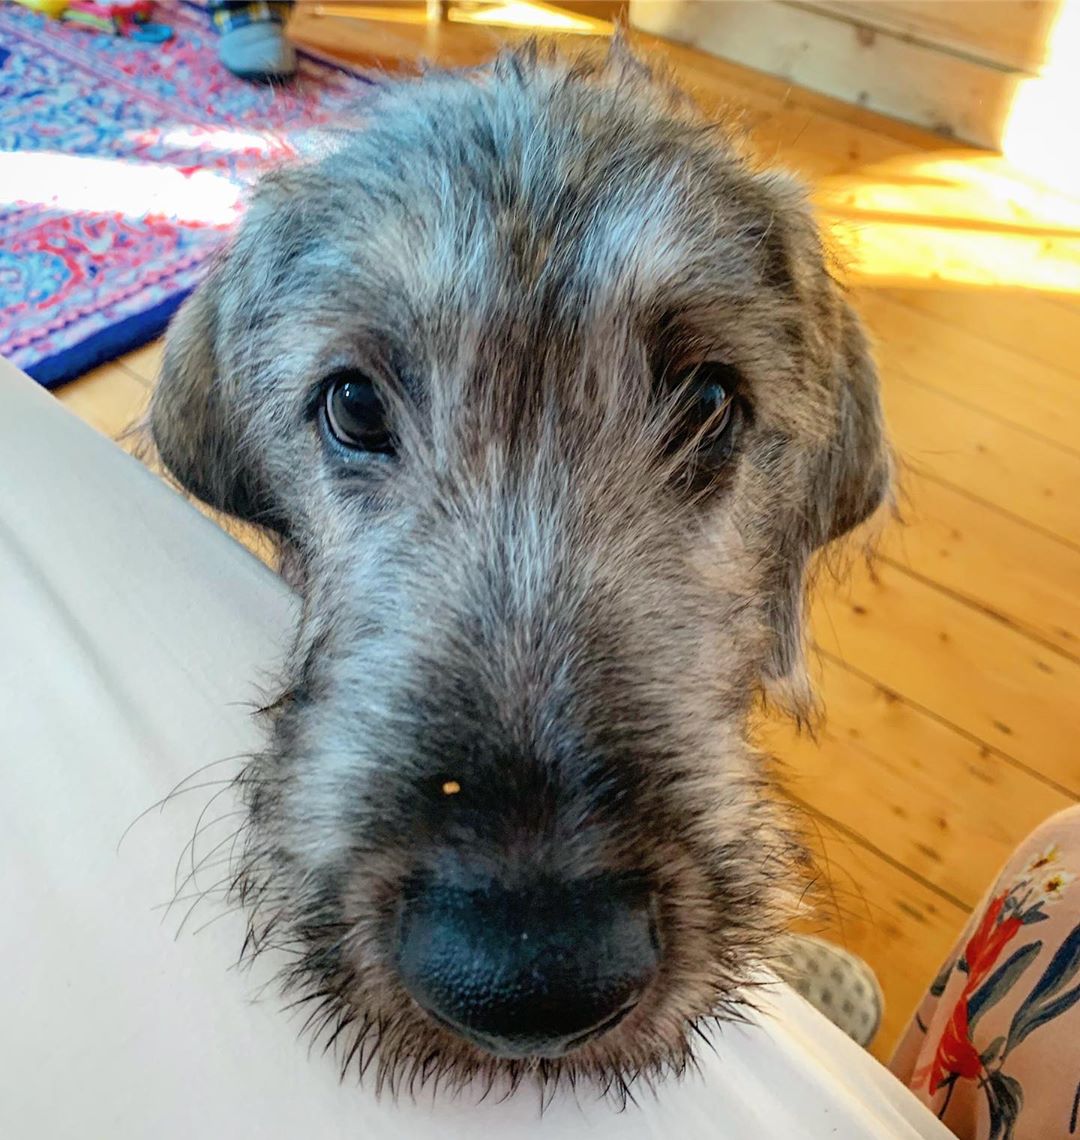 An Irish Wolfhound sitting on the wooden floor with its begging face on the side of the bed